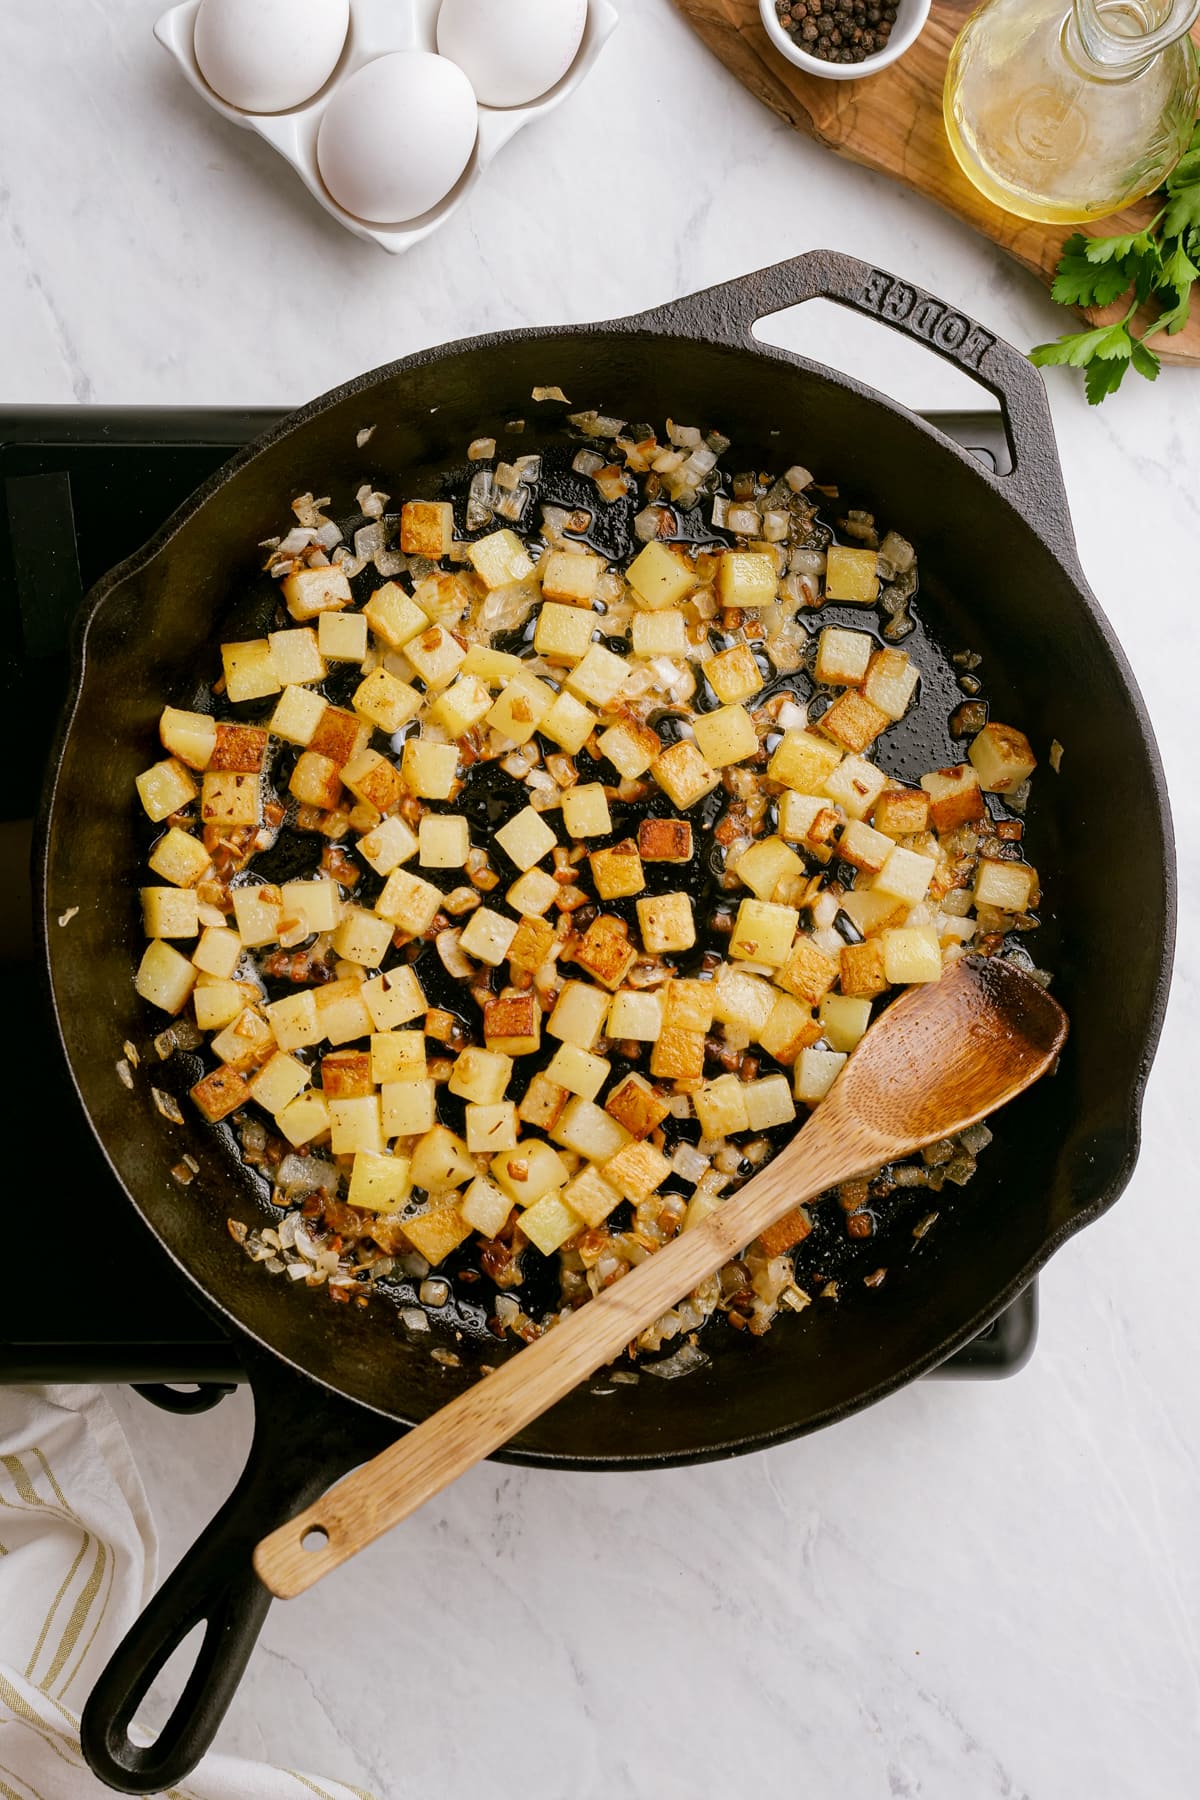 browning potatoes in a skillet